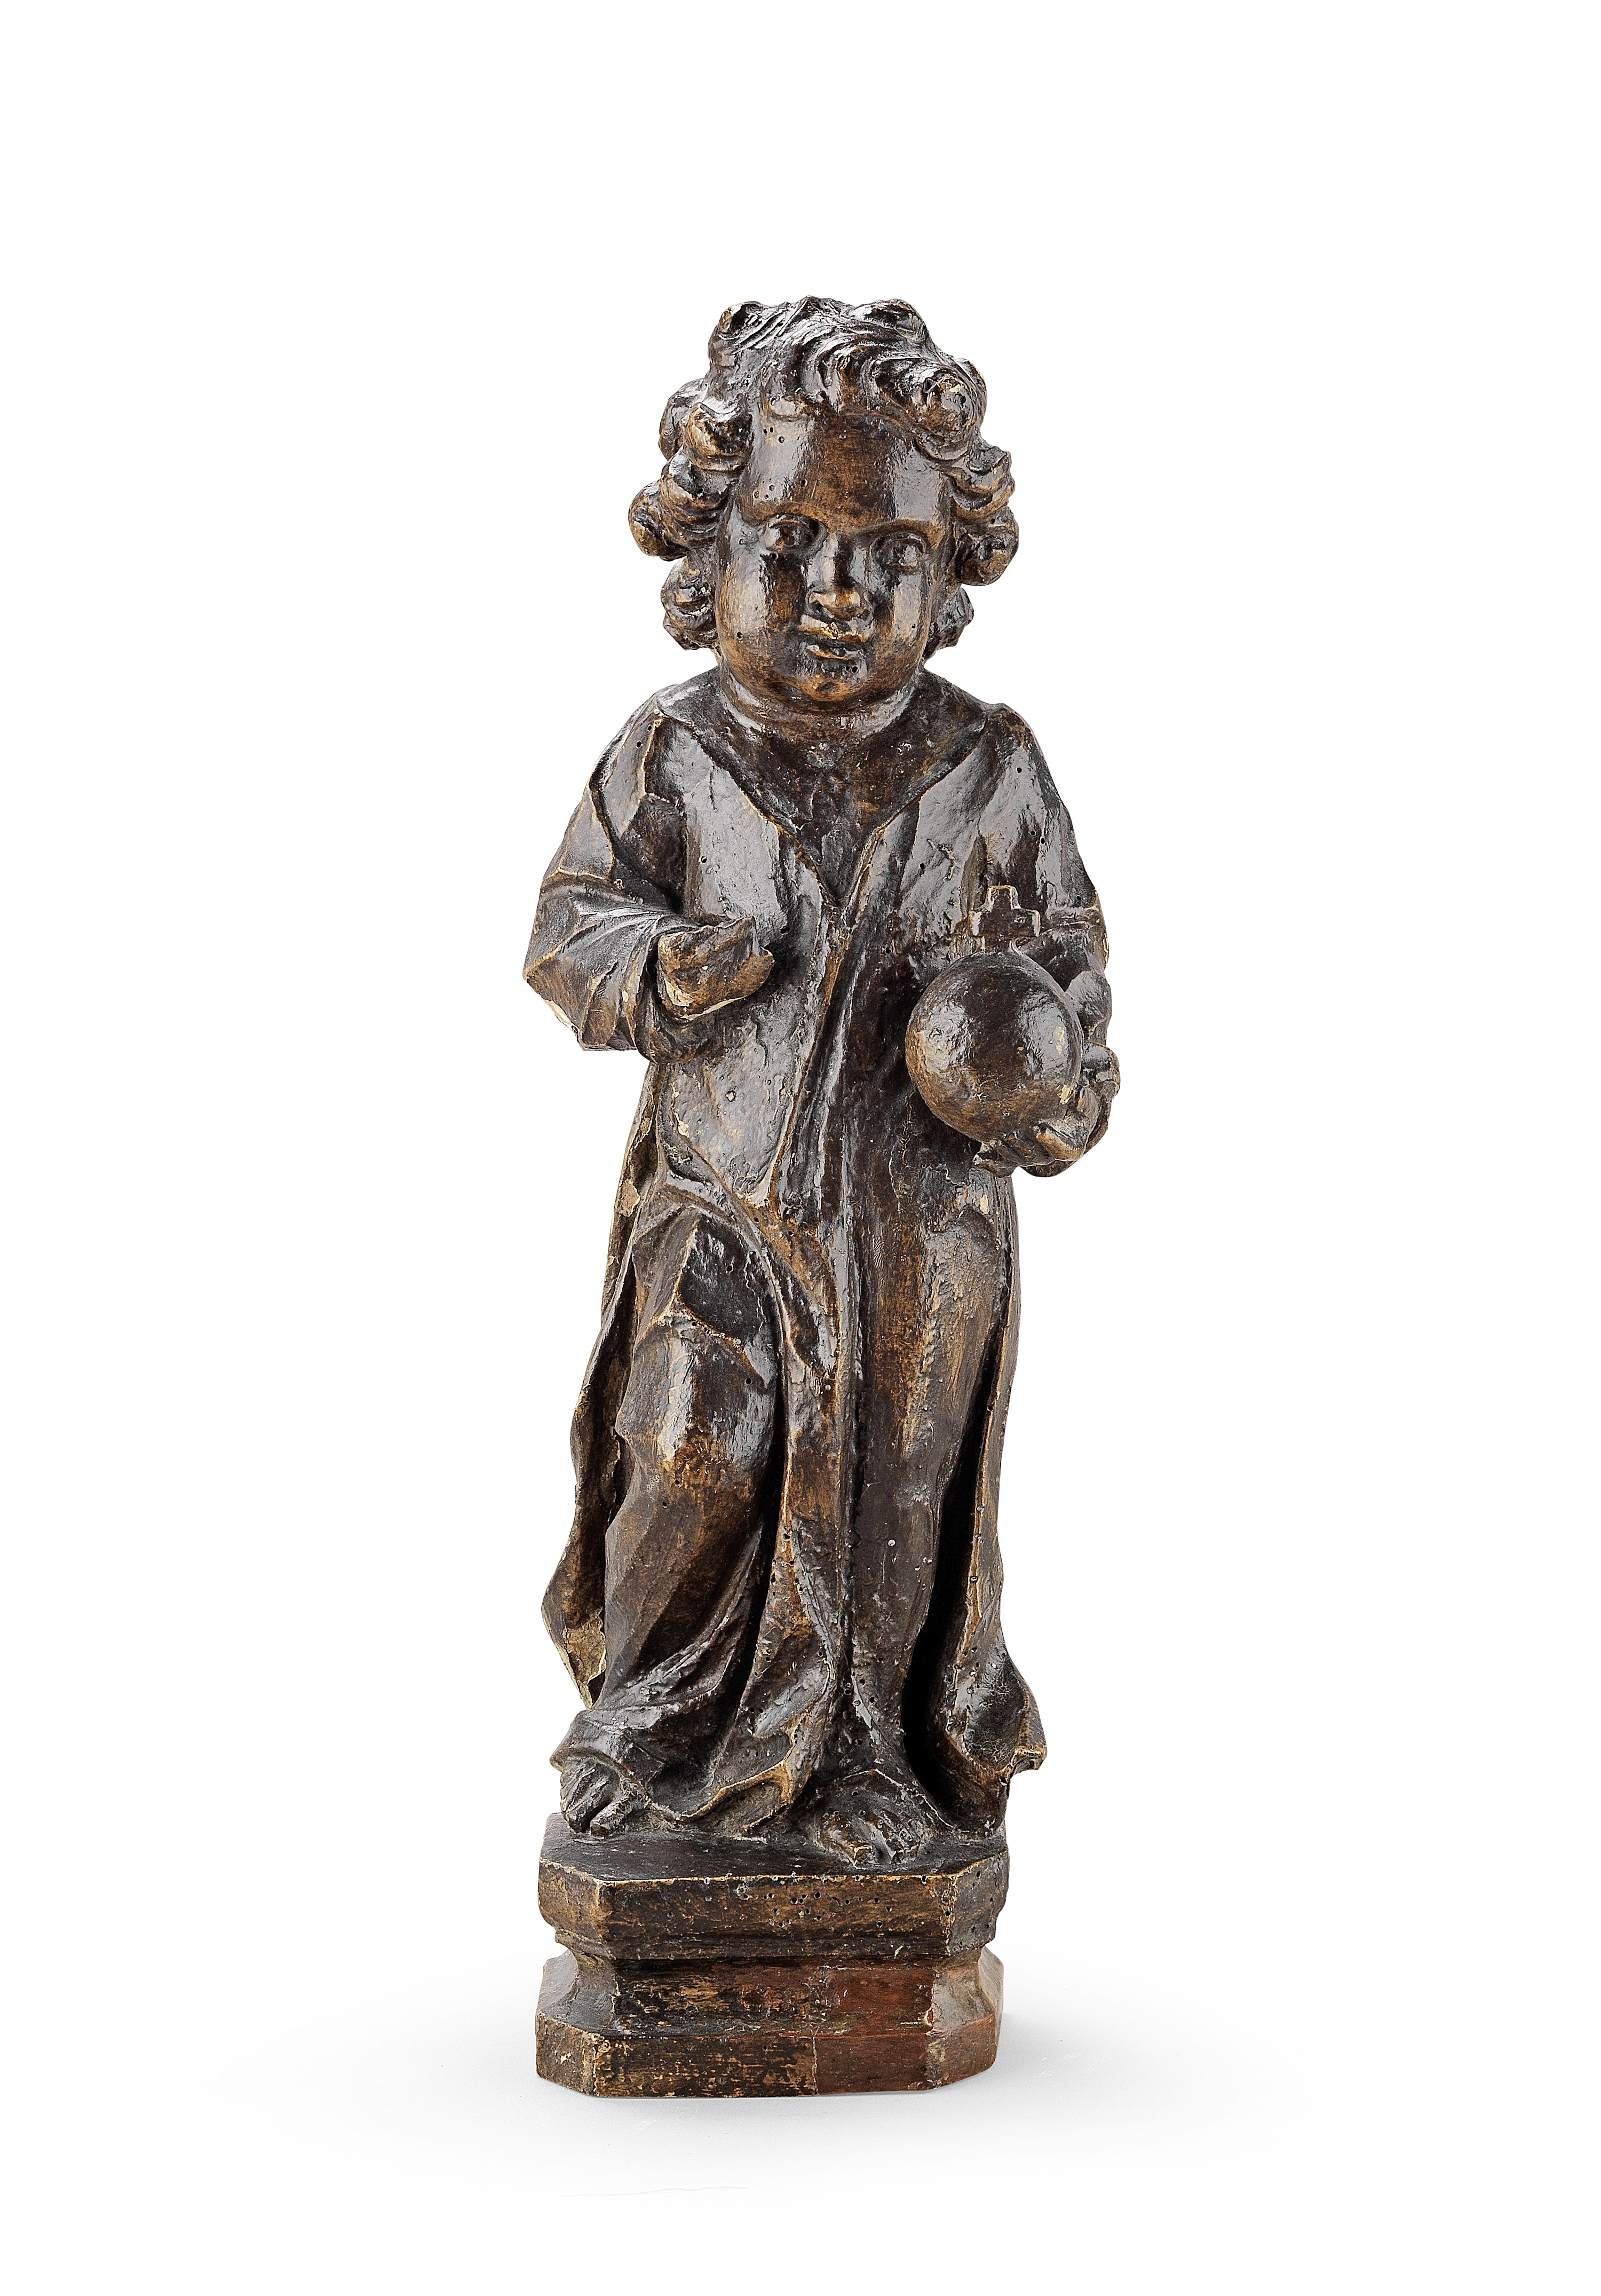 A late 17th/early 18th century carved walnut, gesso and polychrome figure of the infant Christ